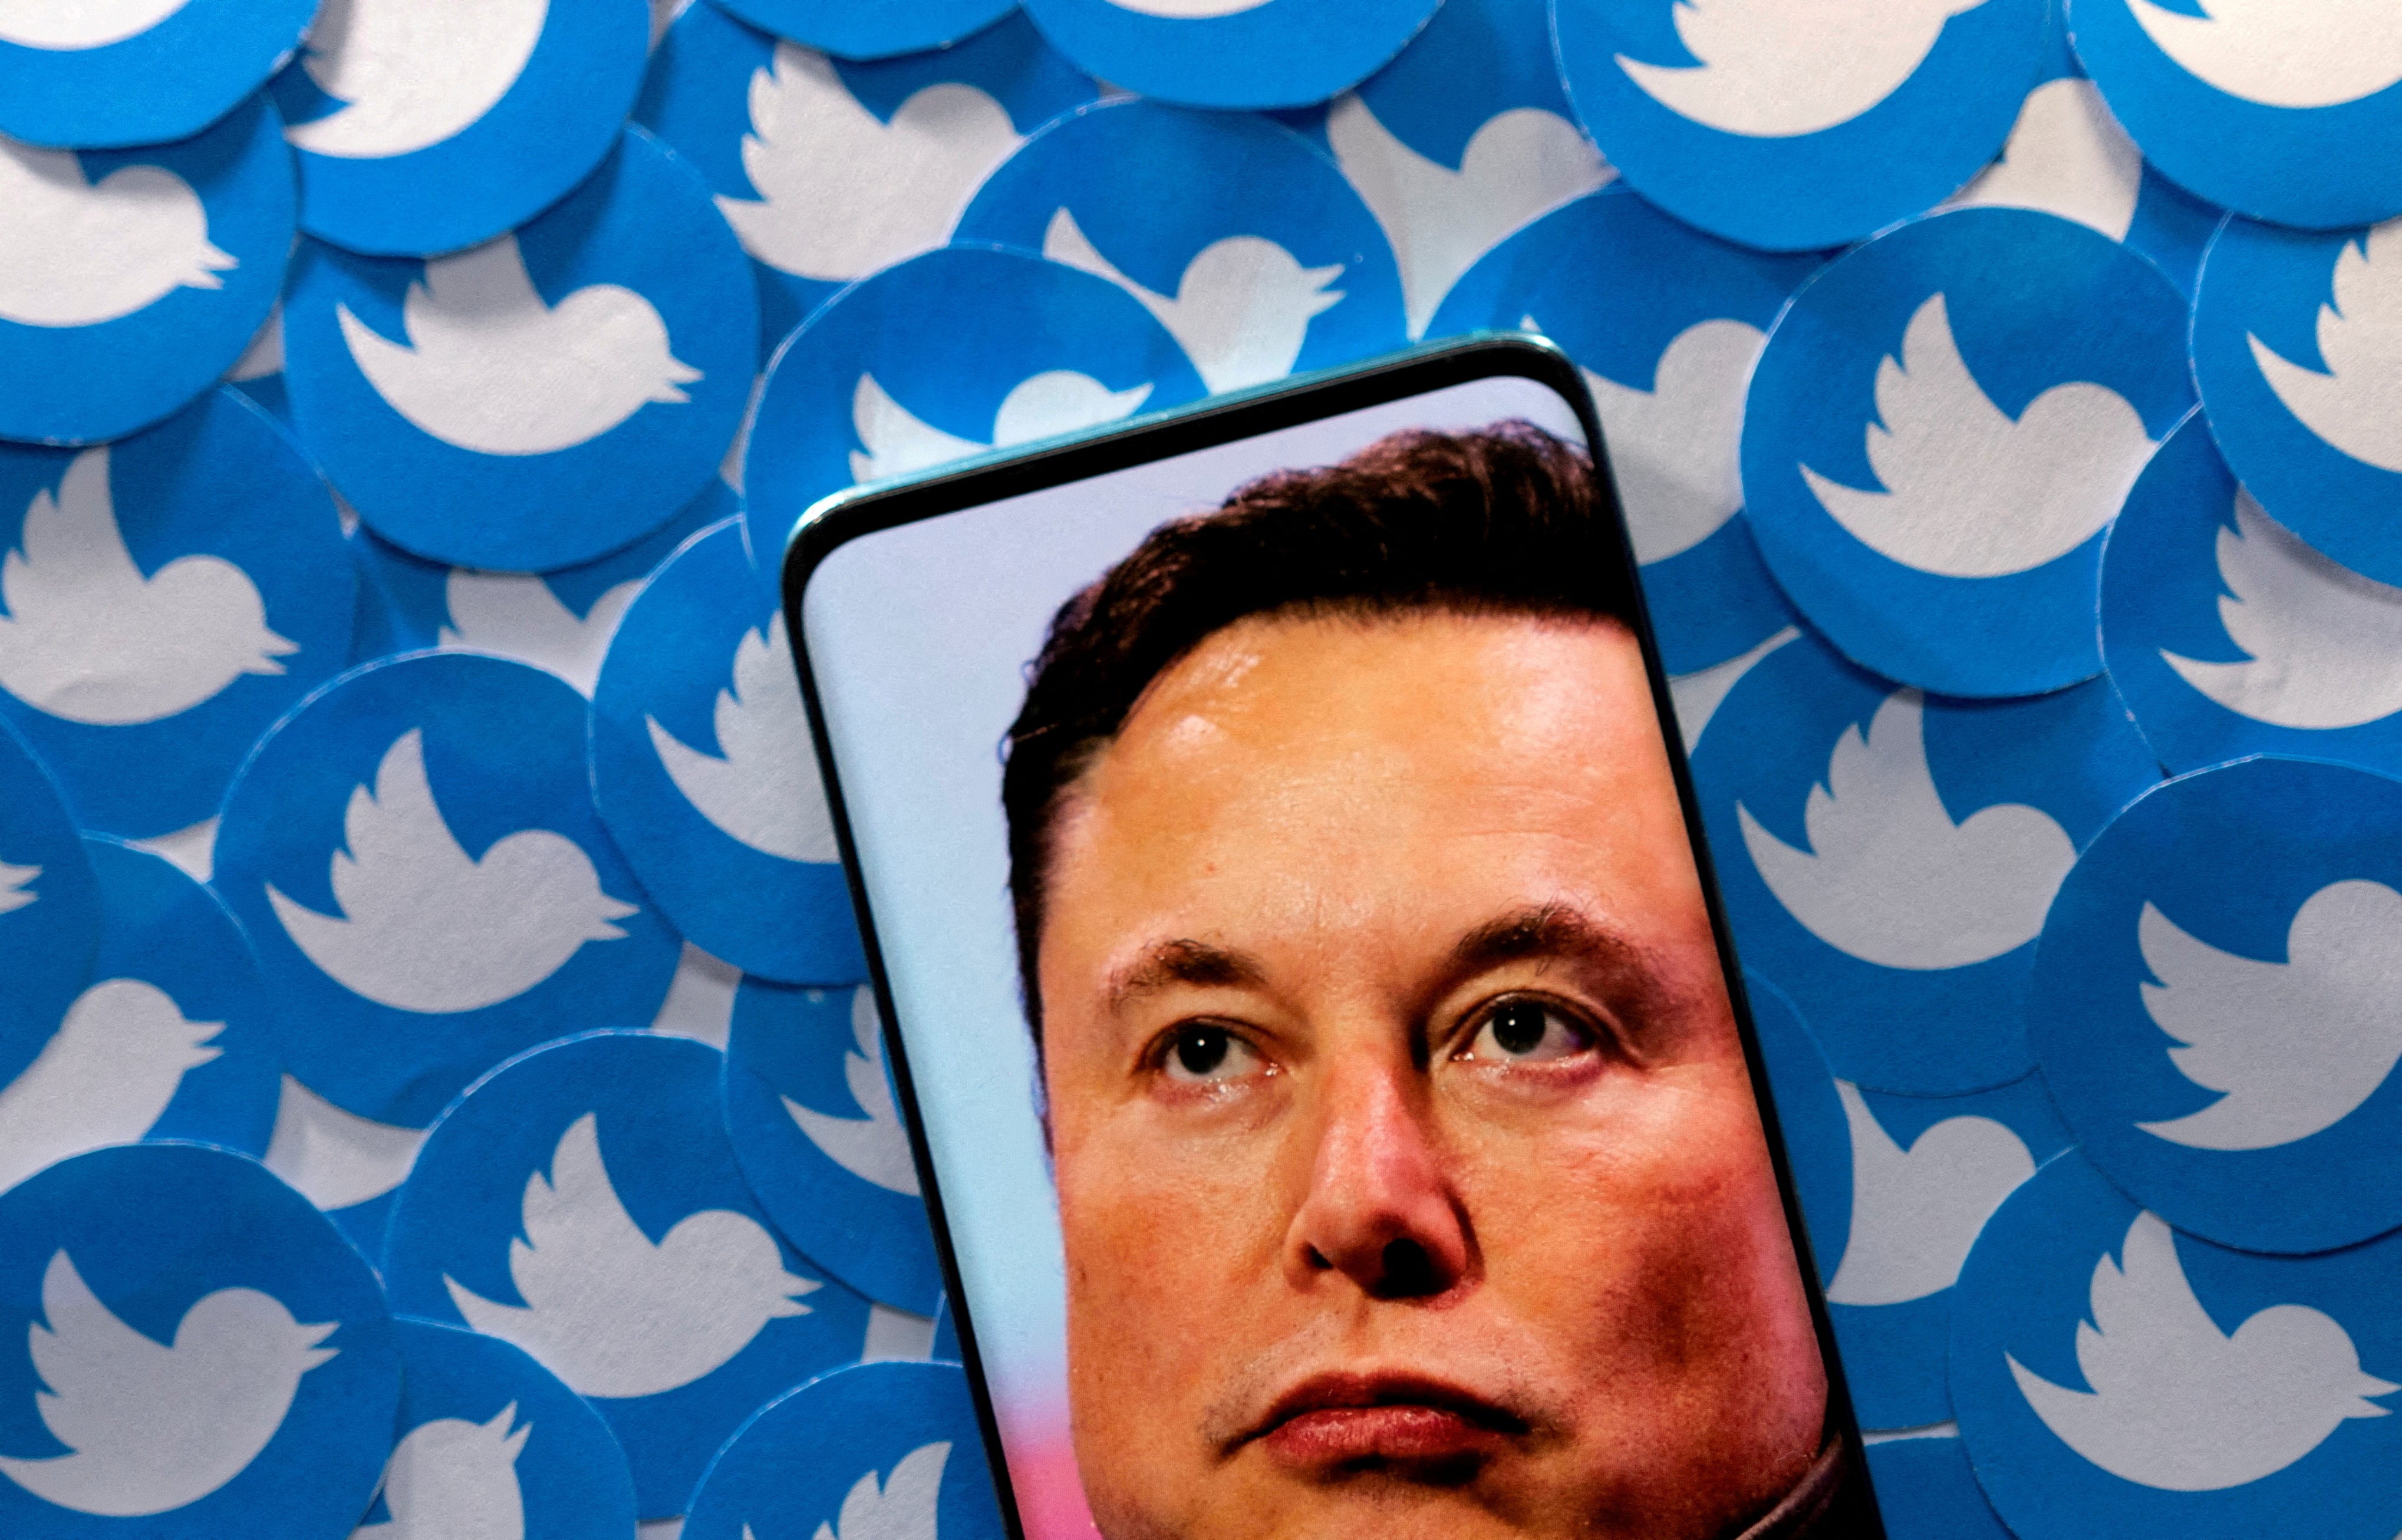 Musk is one of Twitter’s most high-profile users